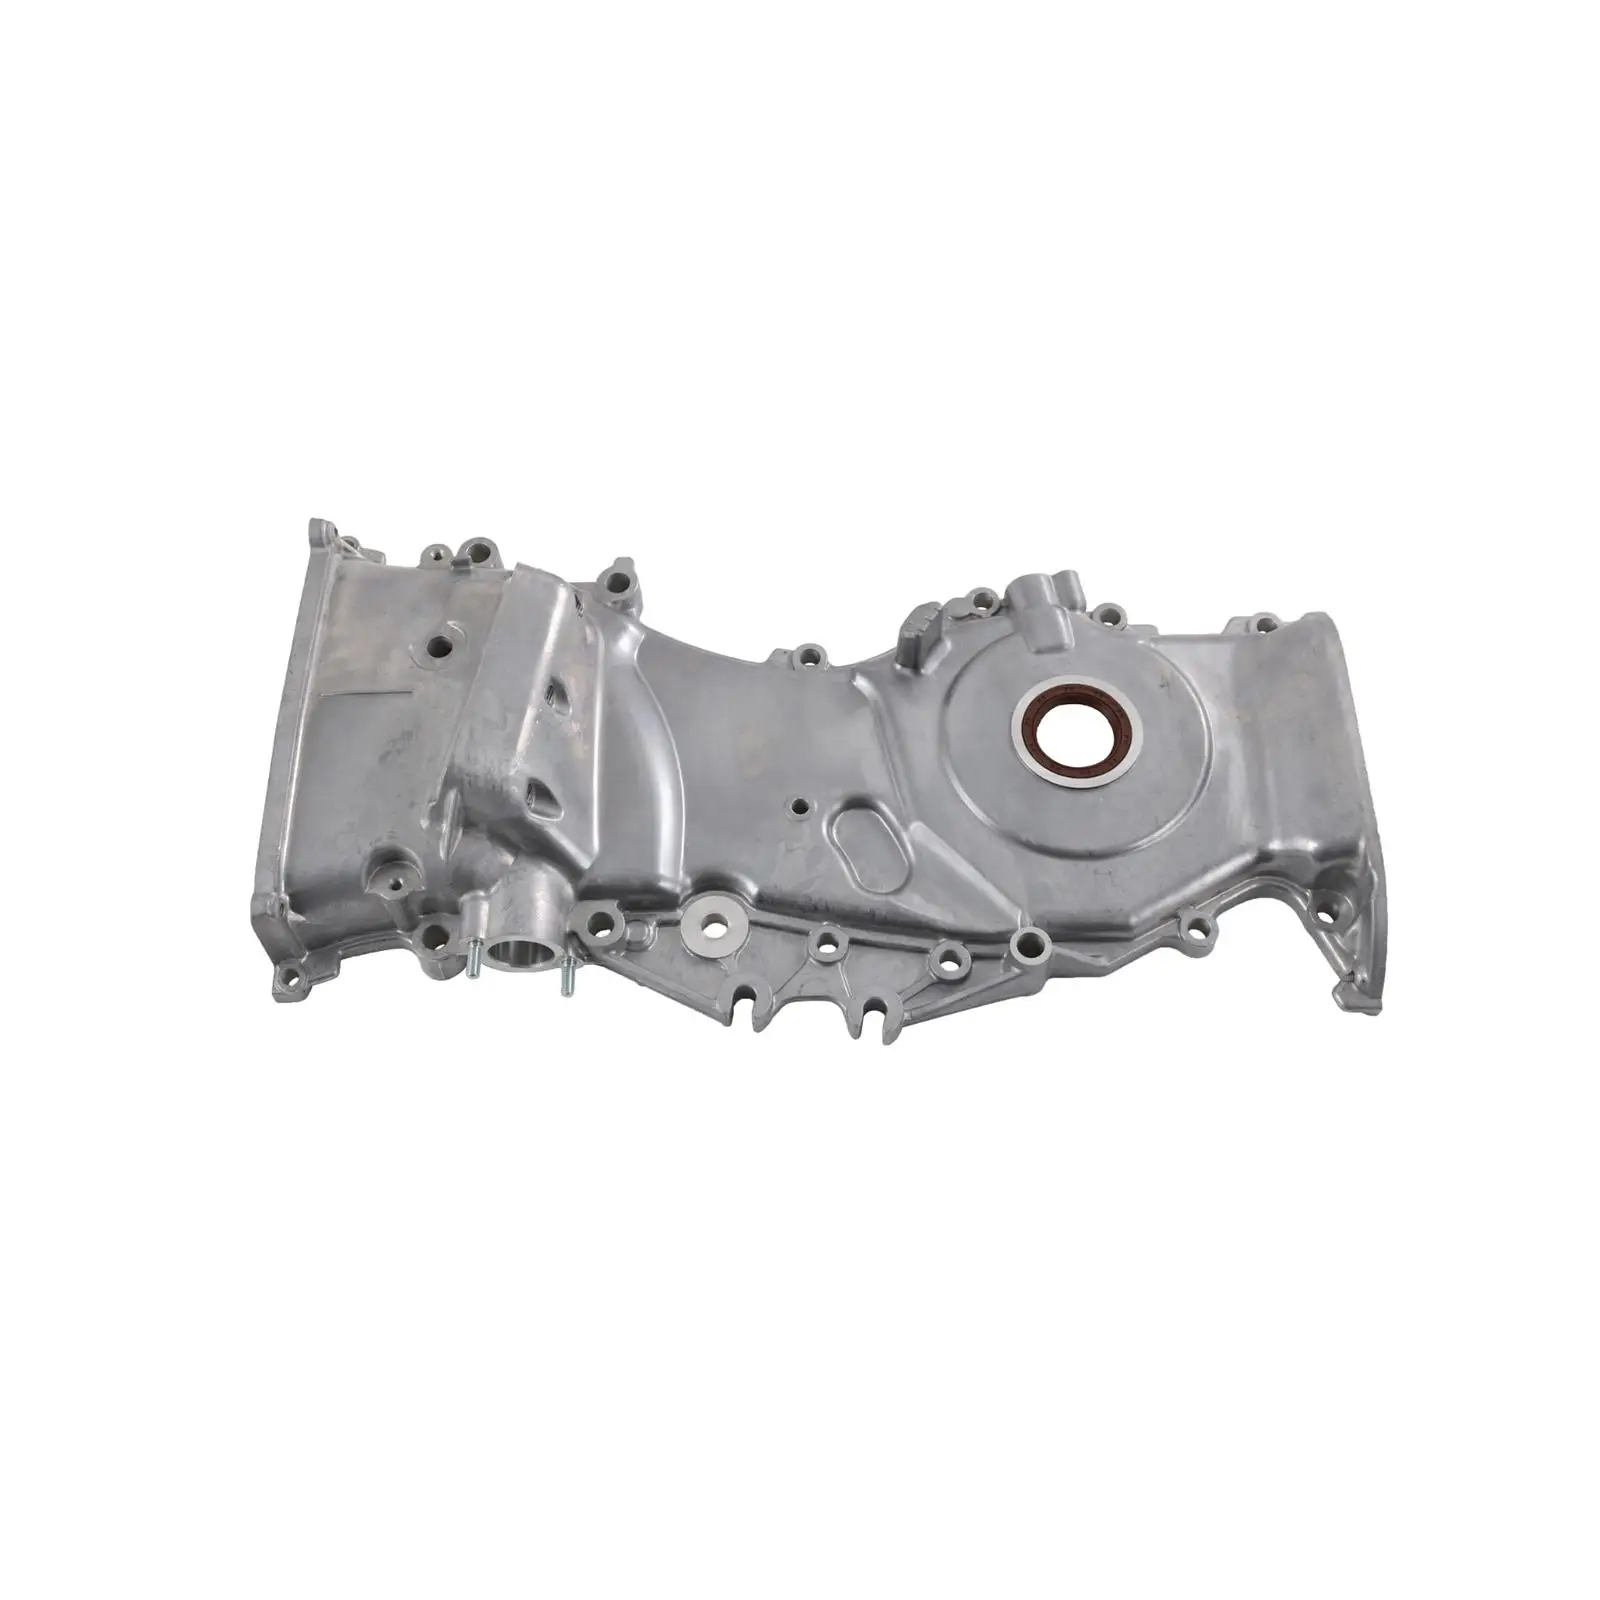 Engine Front Timing Cover 1131028070 for Toyota for camry for highlander Solara